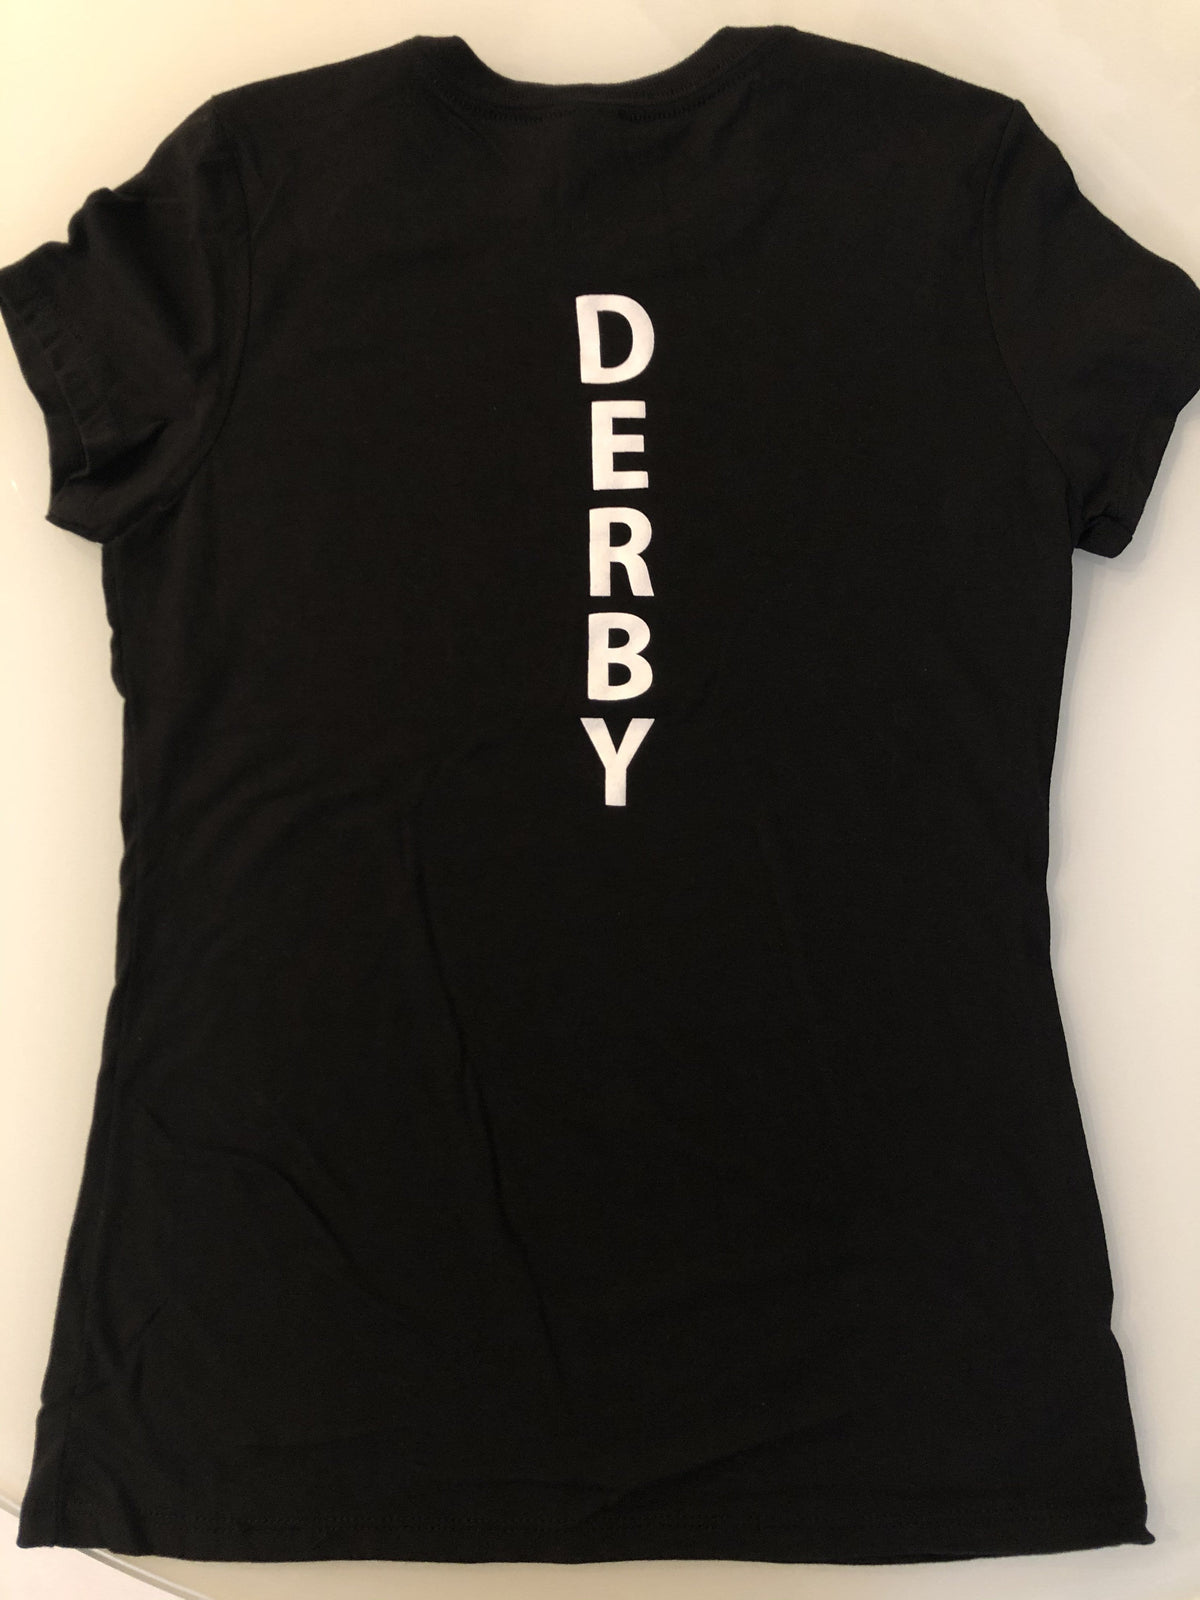 Equestrian Team Apparel Graphic Tees Derby Graphic Tee - ETA equestrian team apparel online tack store mobile tack store custom farm apparel custom show stable clothing equestrian lifestyle horse show clothing riding clothes horses equestrian tack store